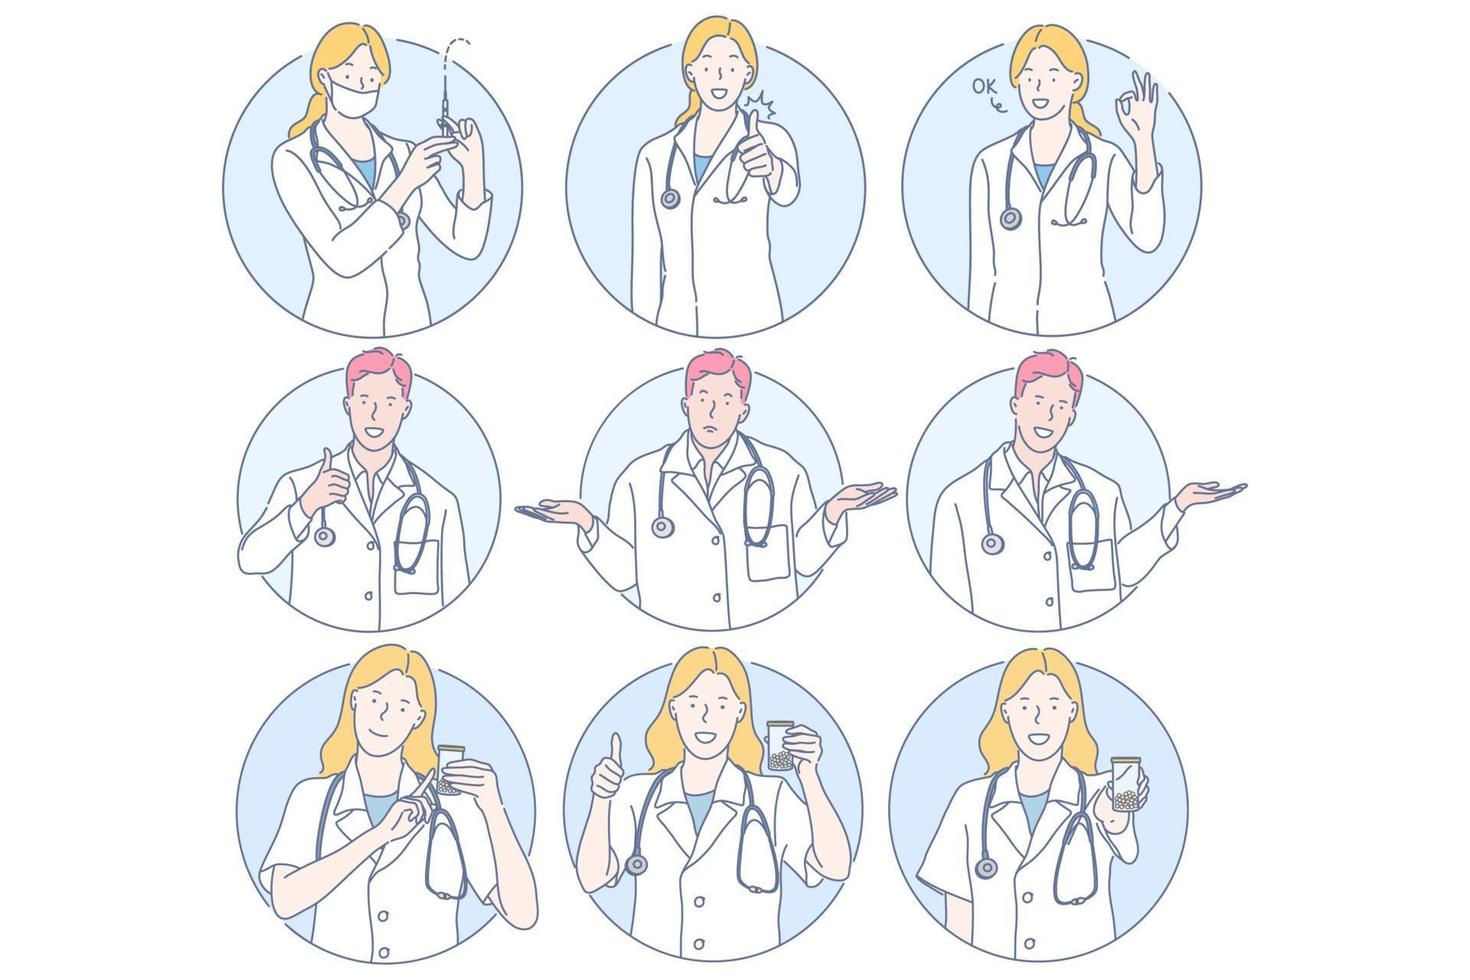 Healthcare, doctor, medicine, injection, medical exam concept. Young men and women doctors cartoon characters showing different sign and gestures with hands, holding syringe and medical exam jar vector